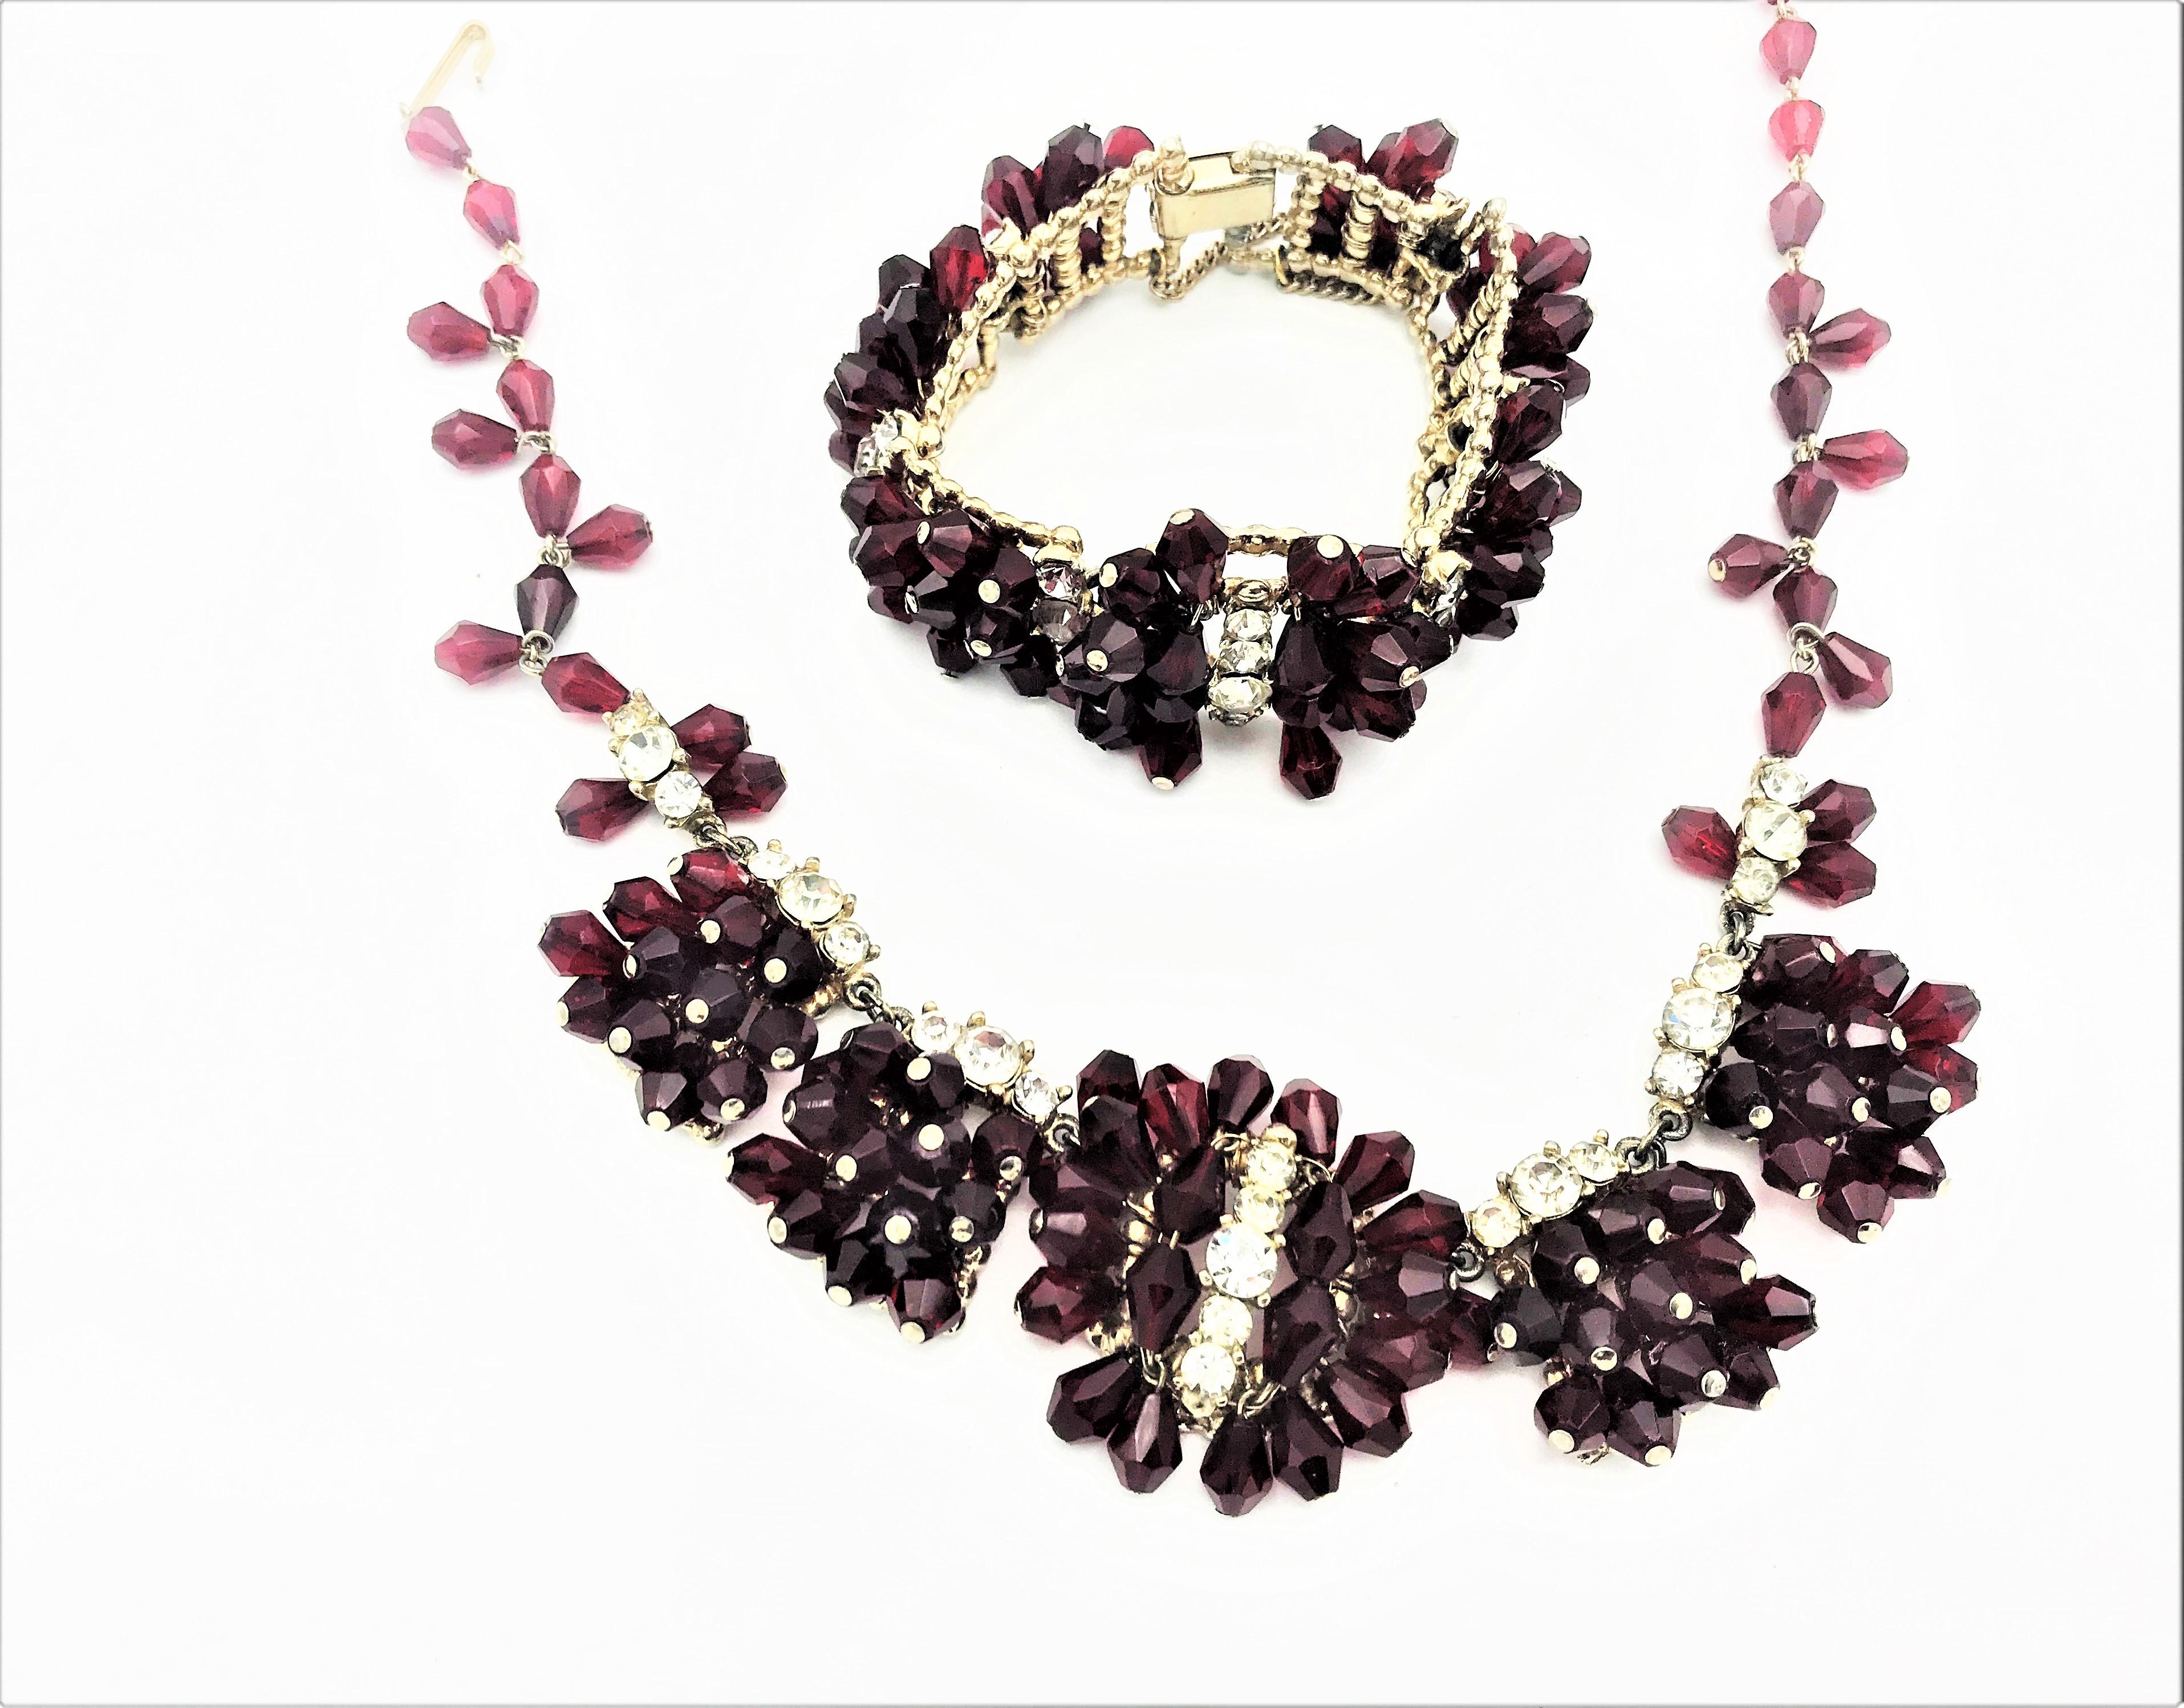 Necklace with matching bracelet made of red cut rhinestones and strass. The chain consists of 5 individual links which are decorated with rhinestones. The bracelet also consists of 6 moving parts, red cut rhinestones and clear rhinestones. The clear